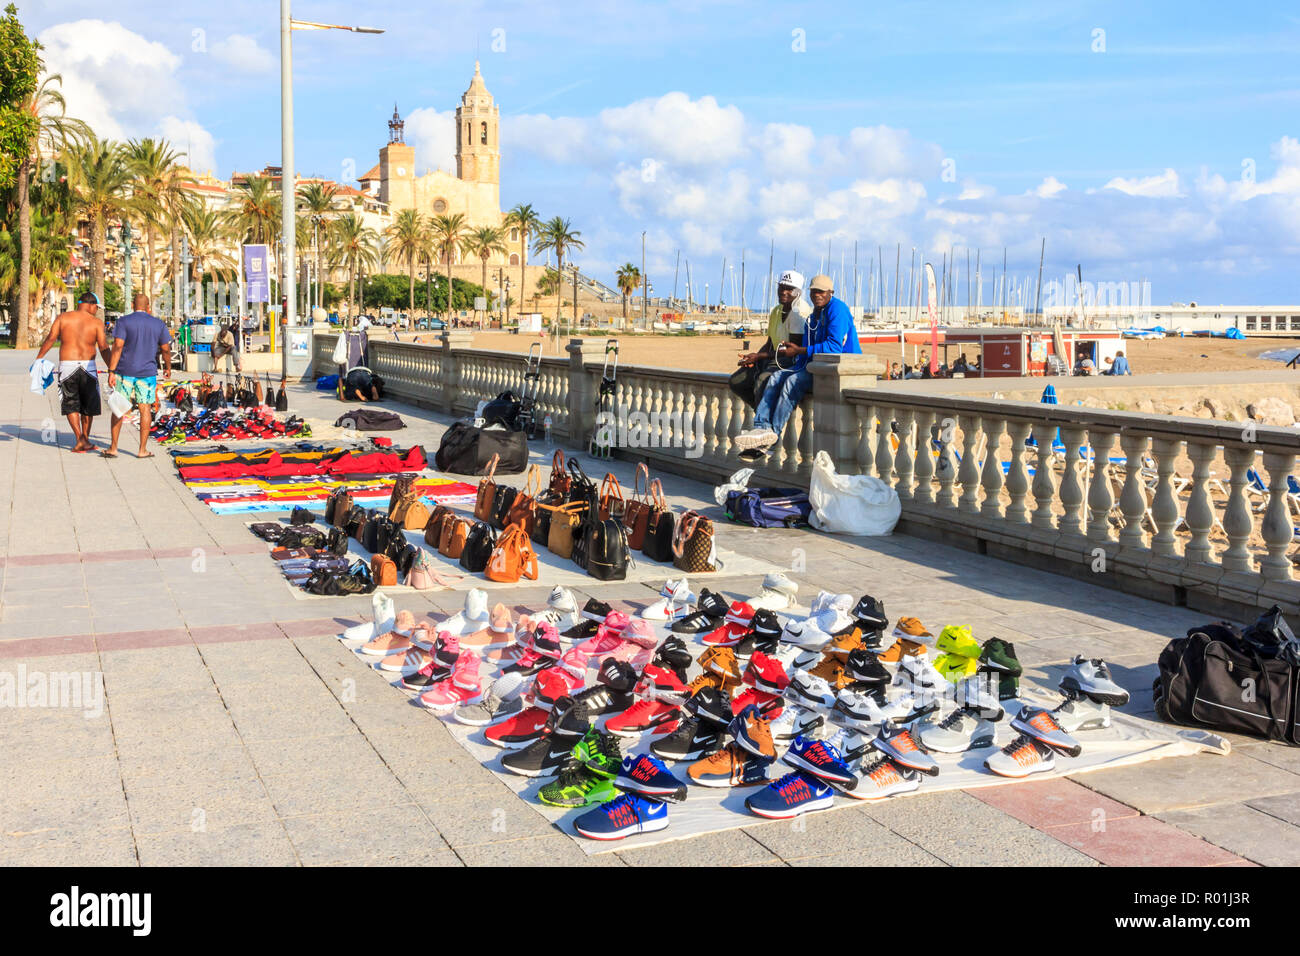 Sitges, Spain - 2nd October 2017: Africamn immigrant vendors selling their wares on the promenade. This is a common practice in Spain. Stock Photo